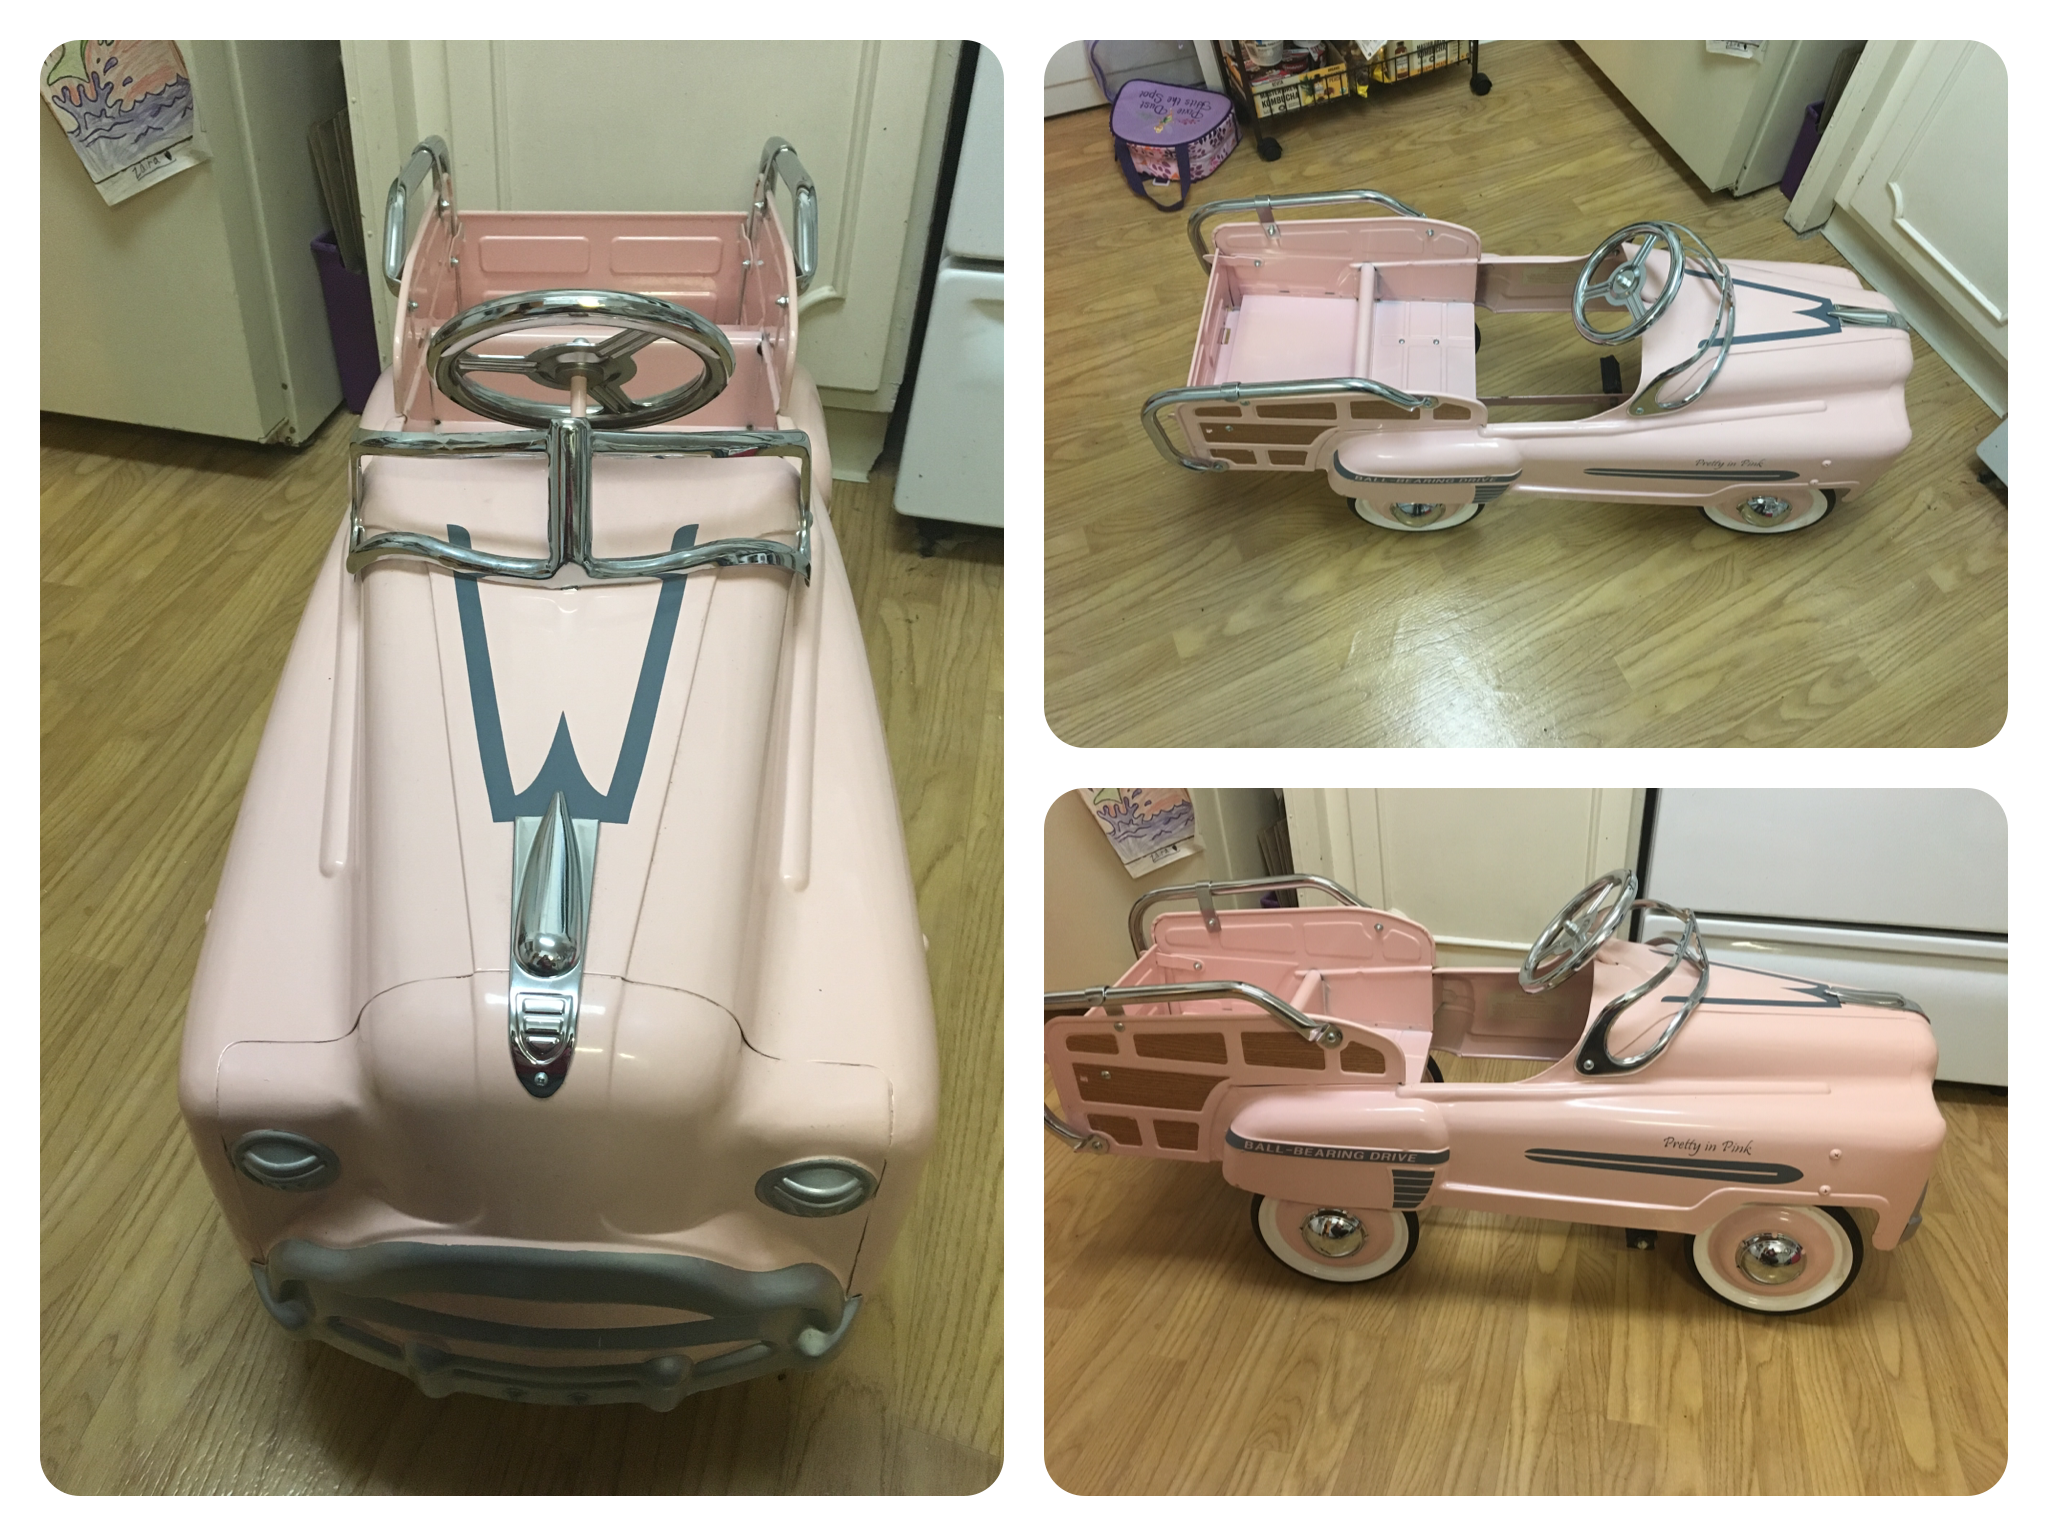 A small montage of a pink pedal car